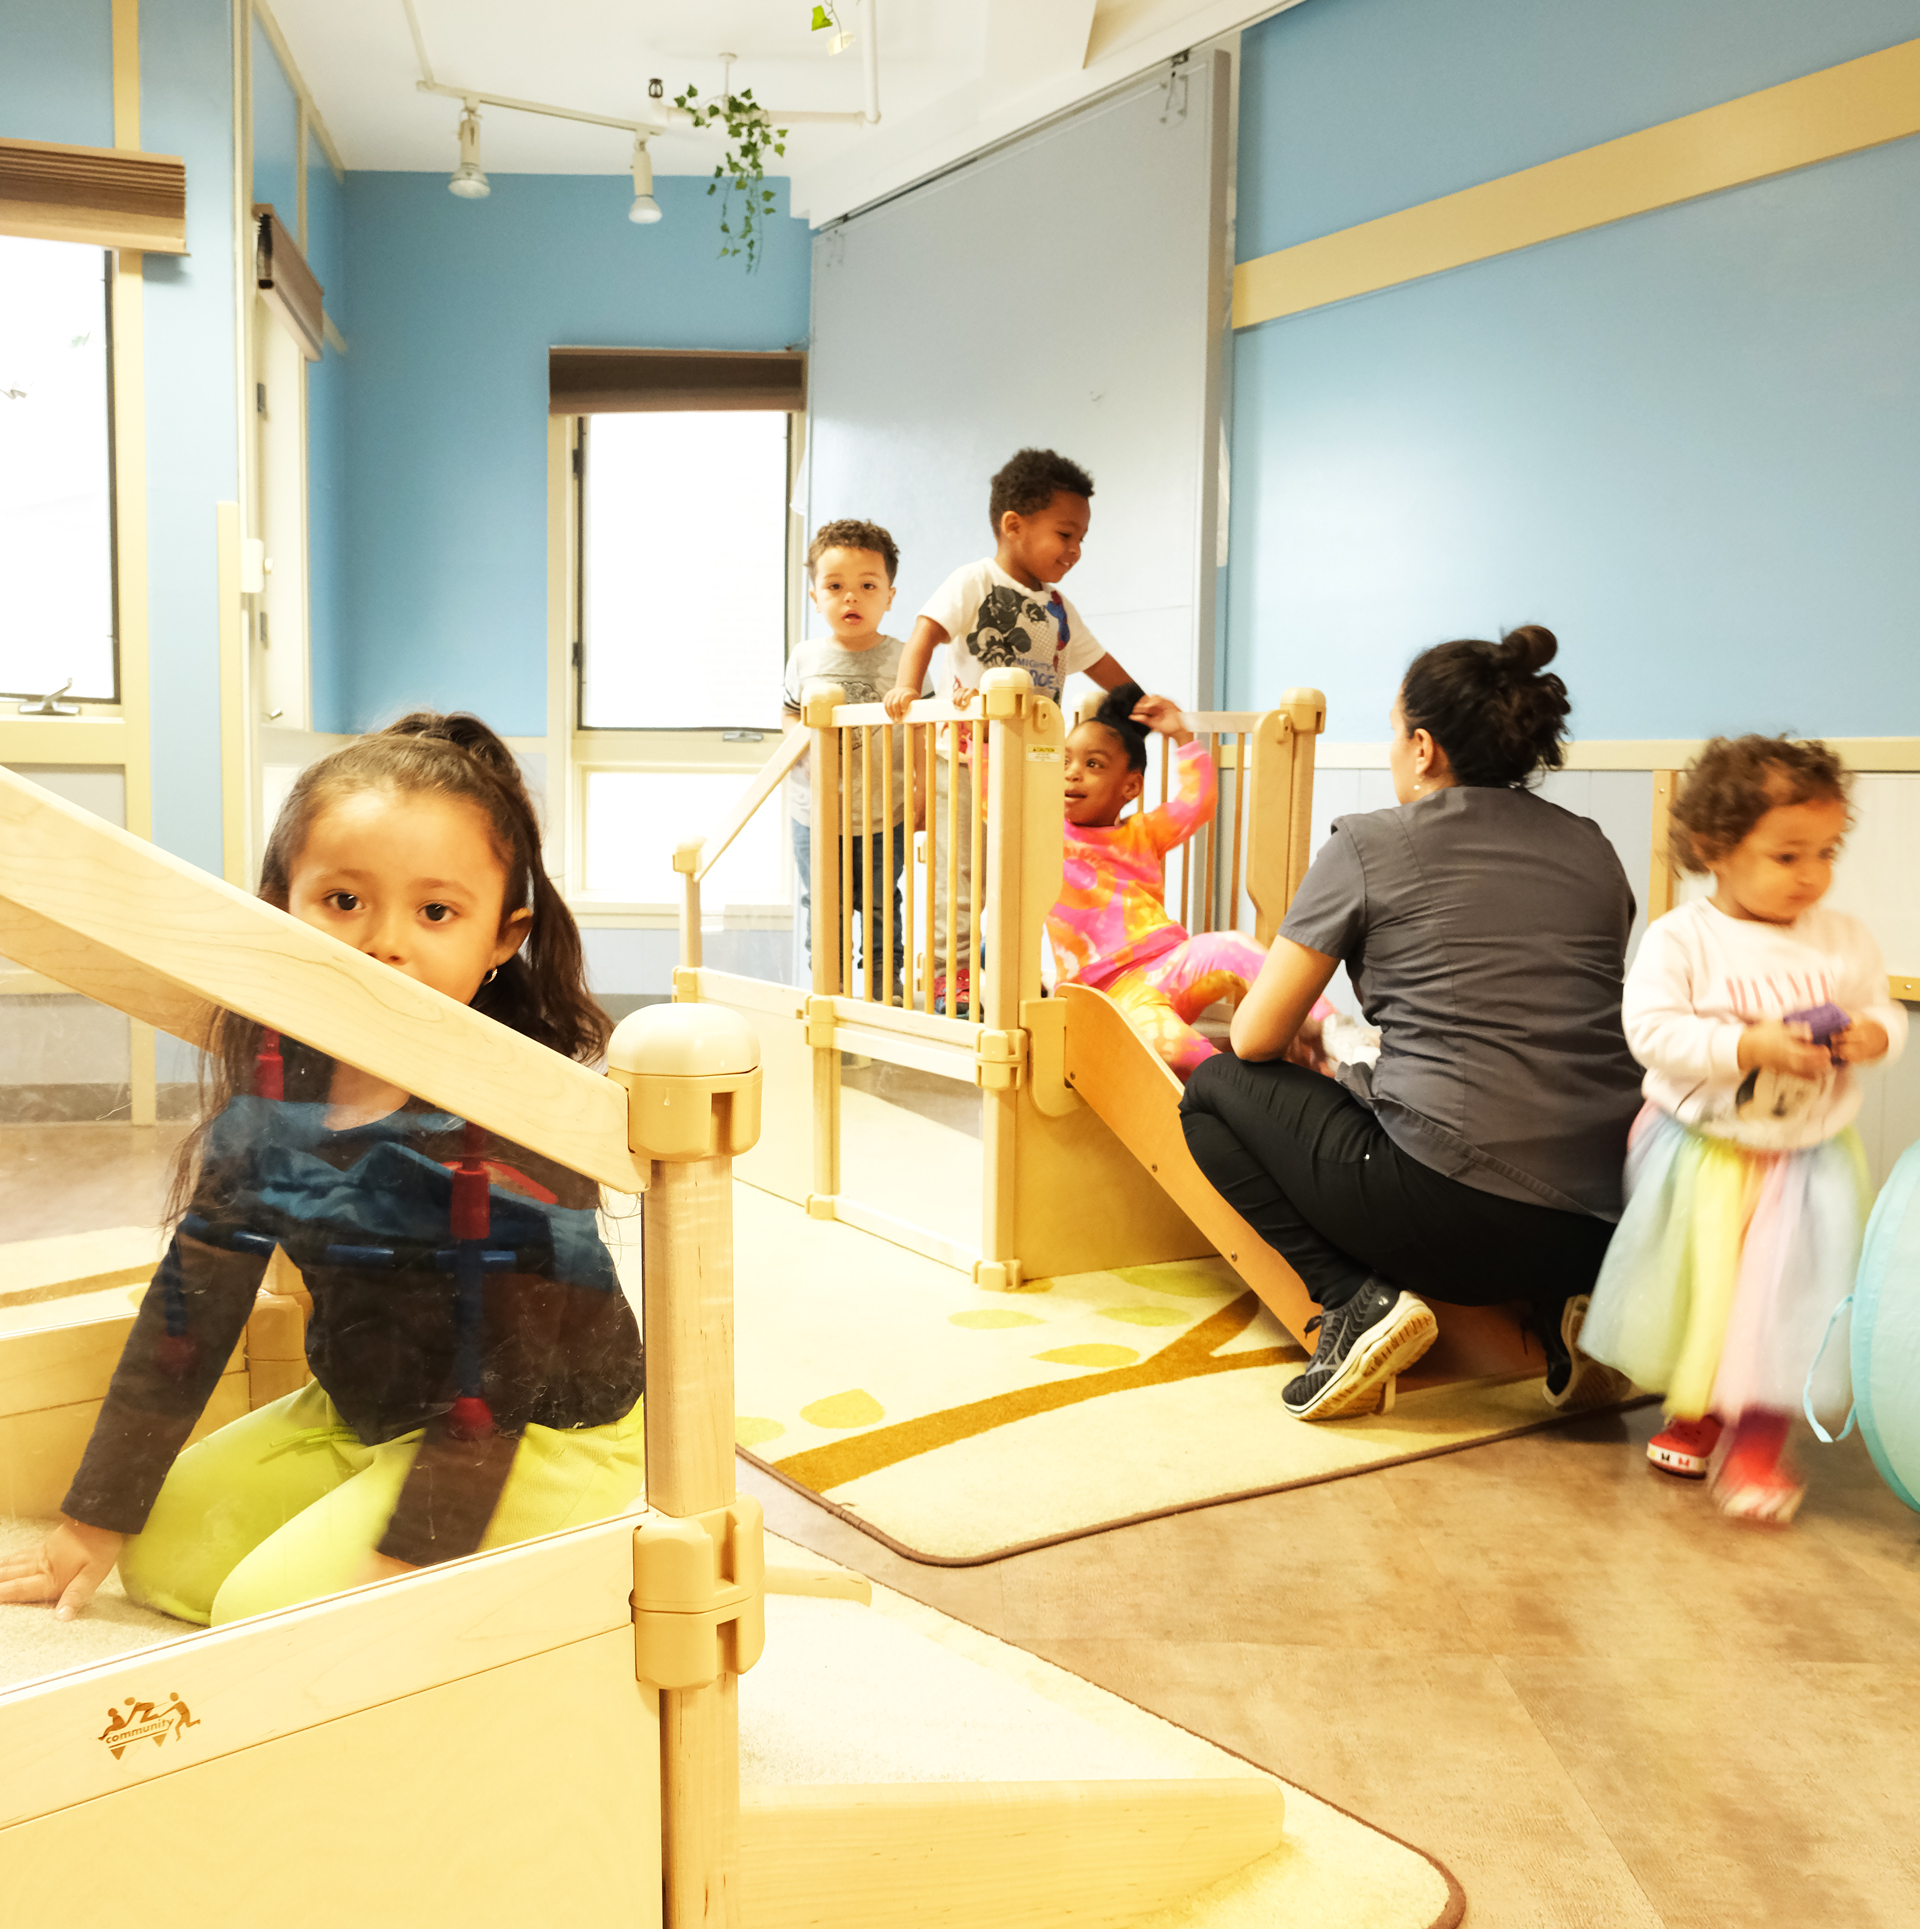 Register for Pre-K Counts - Lancaster City Early Education - Free for Eligible families Lancaster Early Education Center formerly Lancaster Day Care Center Quality early care & education since 1915.